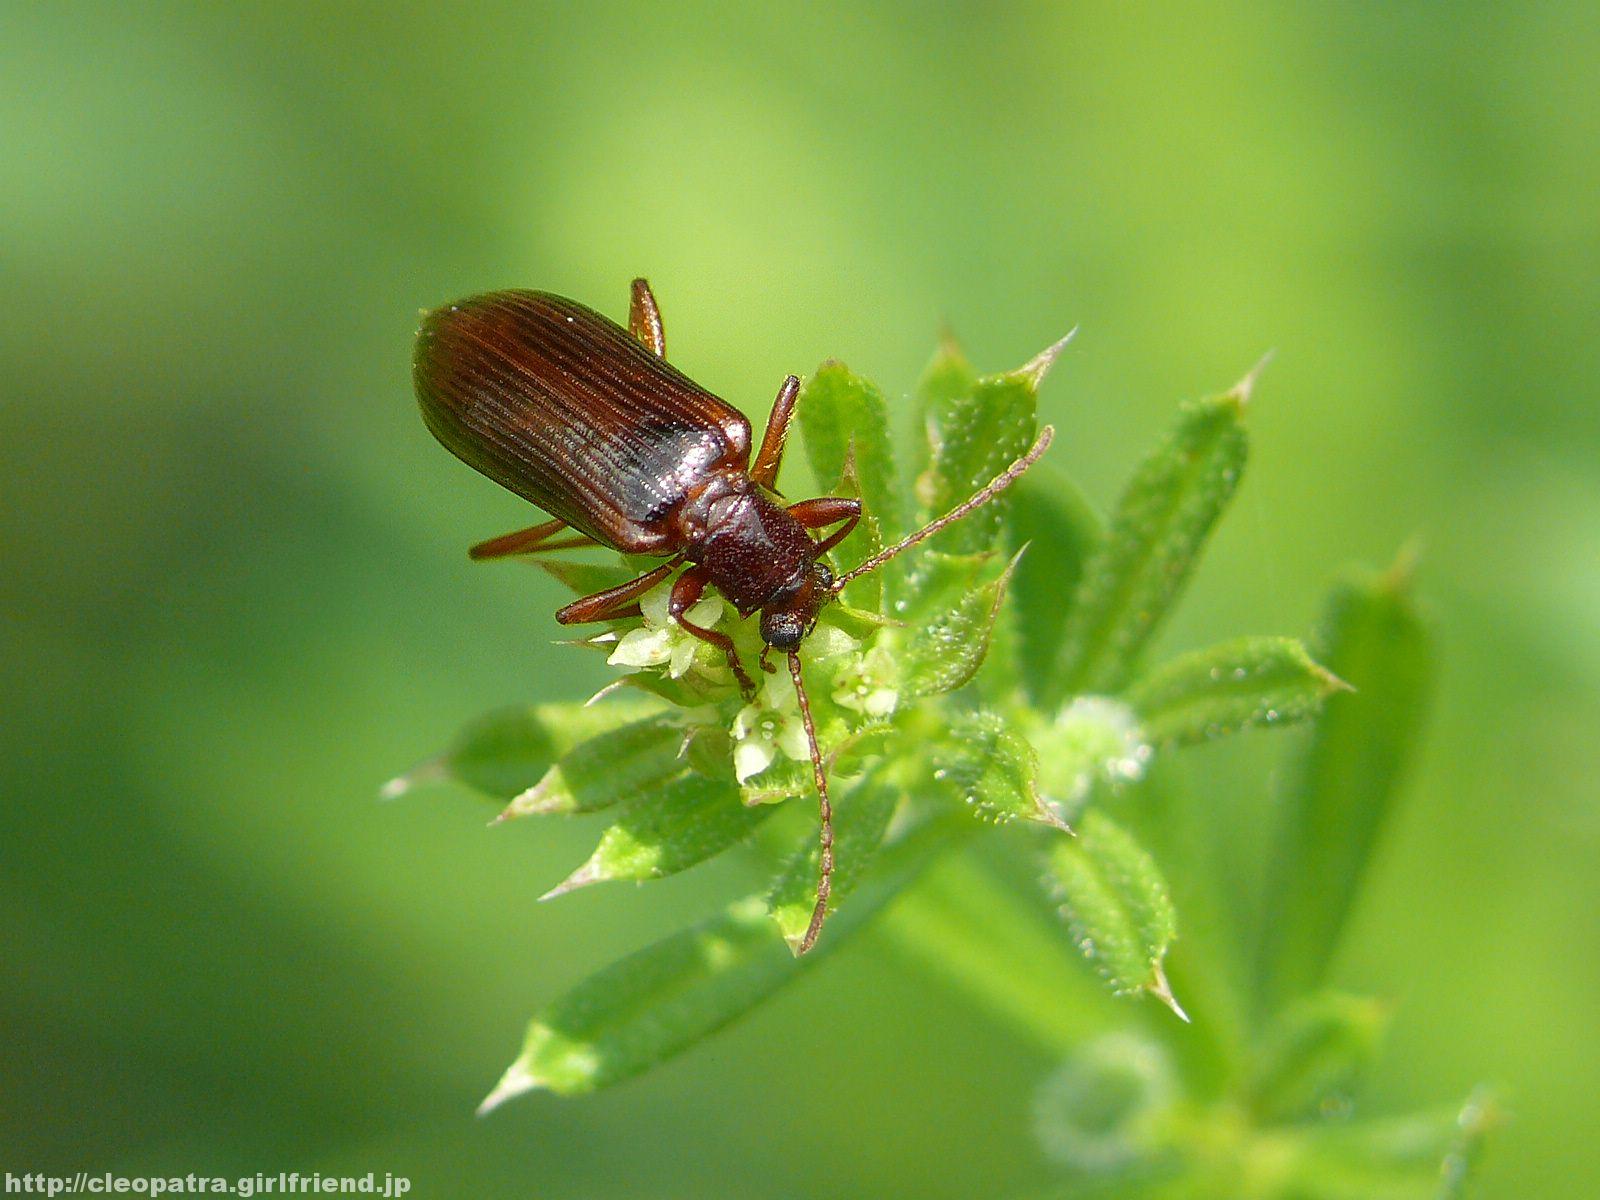 Reddish Brown Beetle ナガハムシダマシっぽい感じの赤茶色の虫 3047s Insects Nature